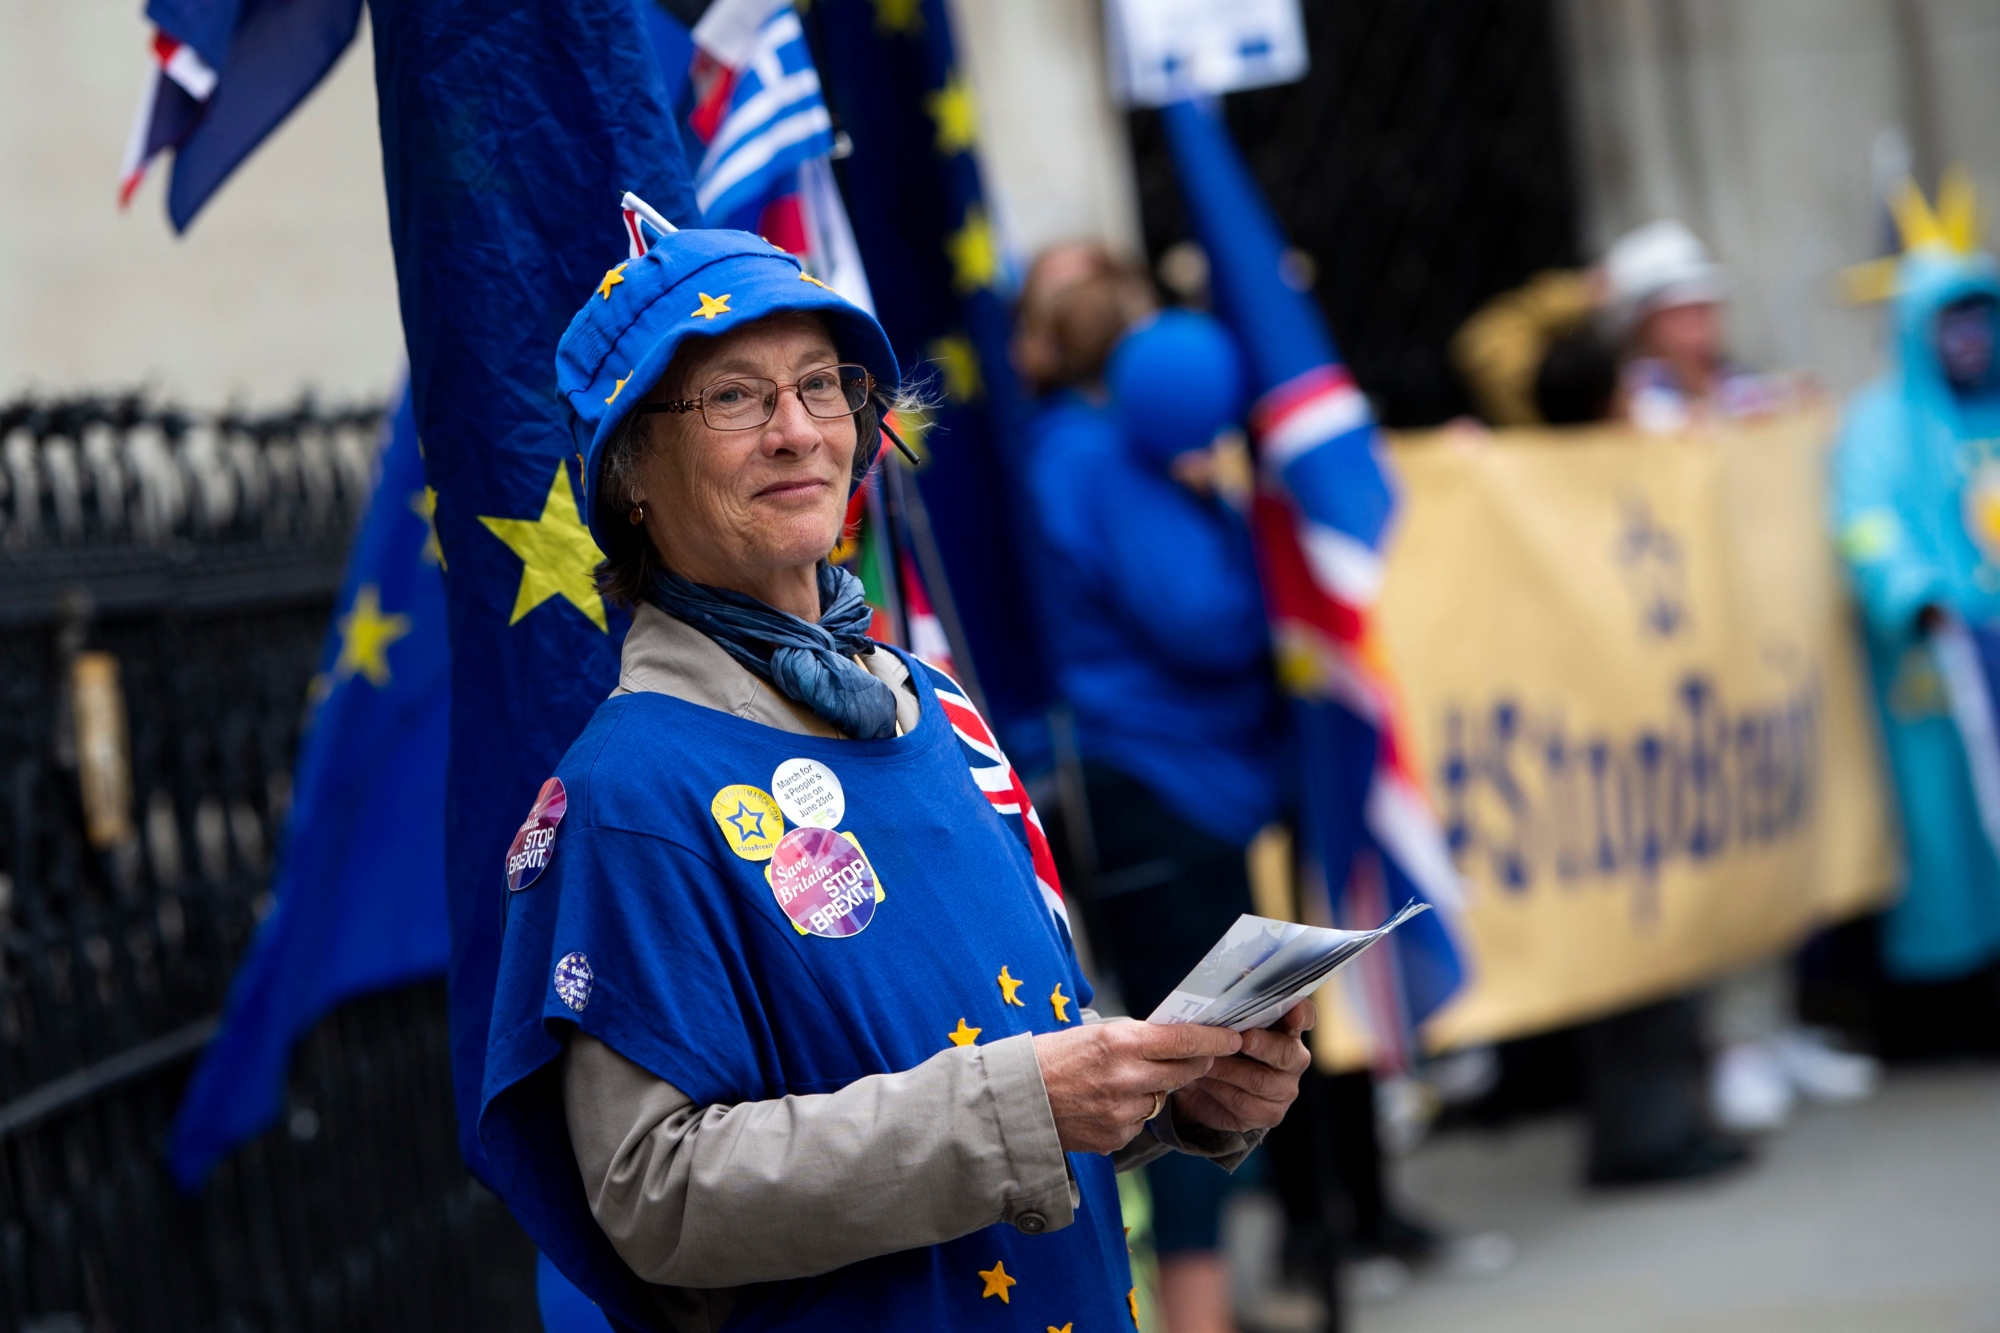 epa06802079 Anti-Brexit campaigners take part in a protest outside the High Court, London, 12 June 2018. The campaigners have launched a legal bid to challenge the legality of Article 50 in an attempt to halt Britain leaving the European Union.  EPA/WILL OLIVER BRITAIN BREXIT